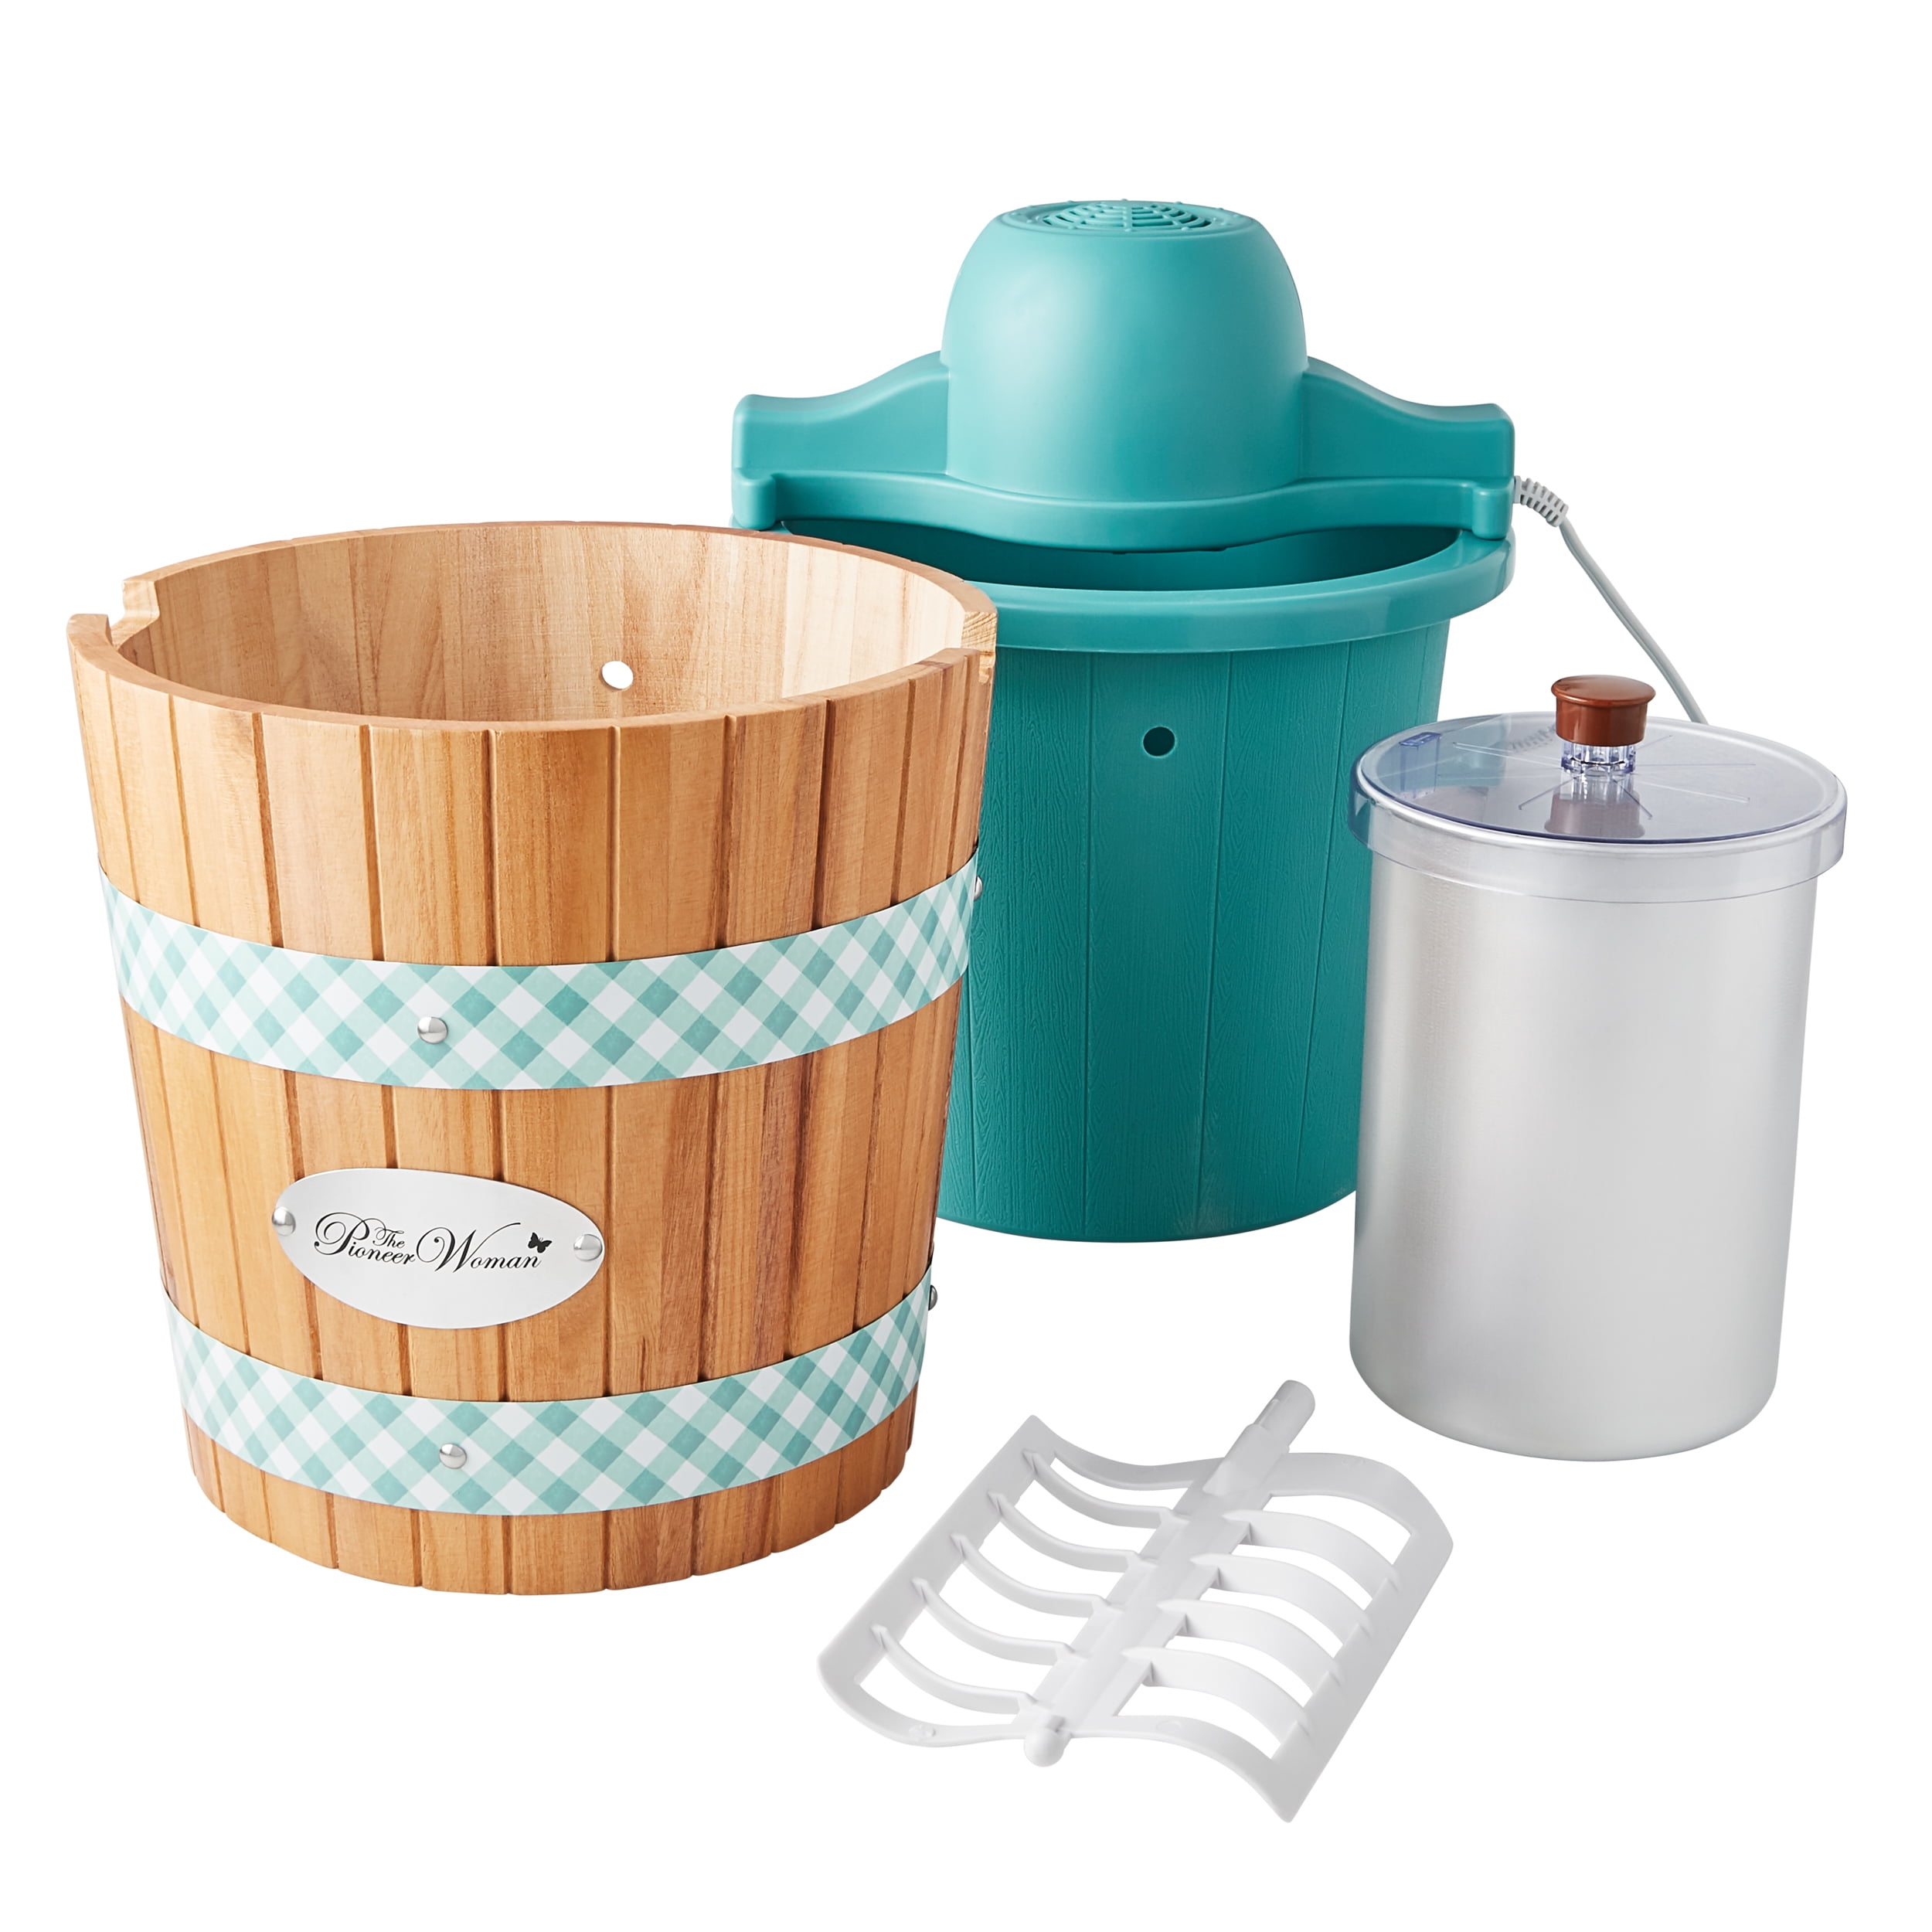 The Pioneer Woman Gingham 4-Quart Ice Cream Maker, Teal